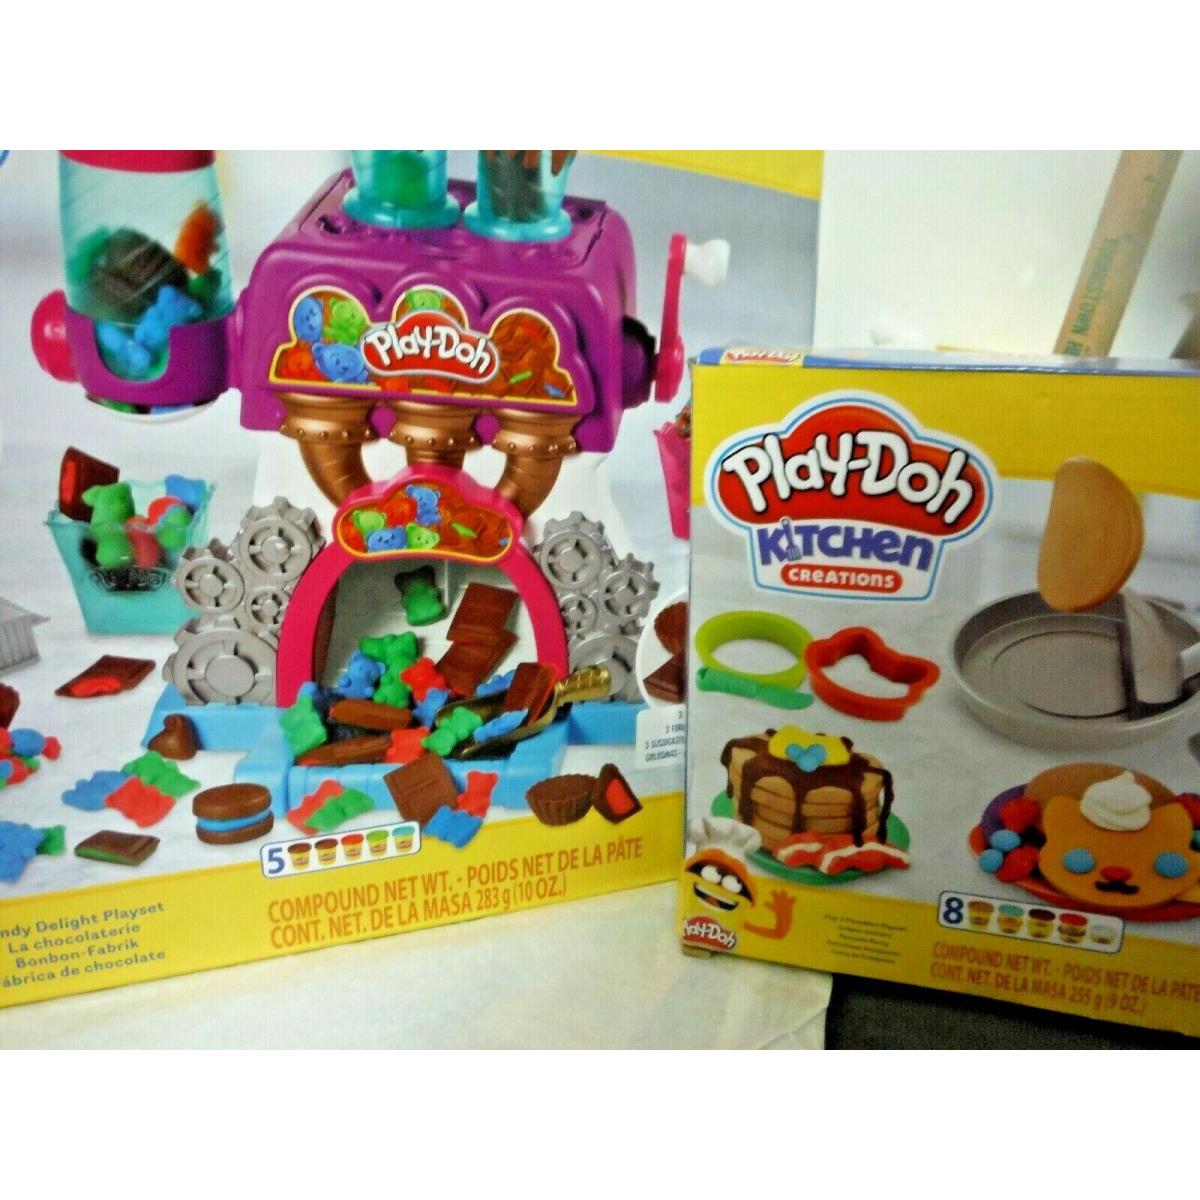 Play-doh Kitchen Creations Candy Delight Flip `n Pancakes Playsets - 2 Sets